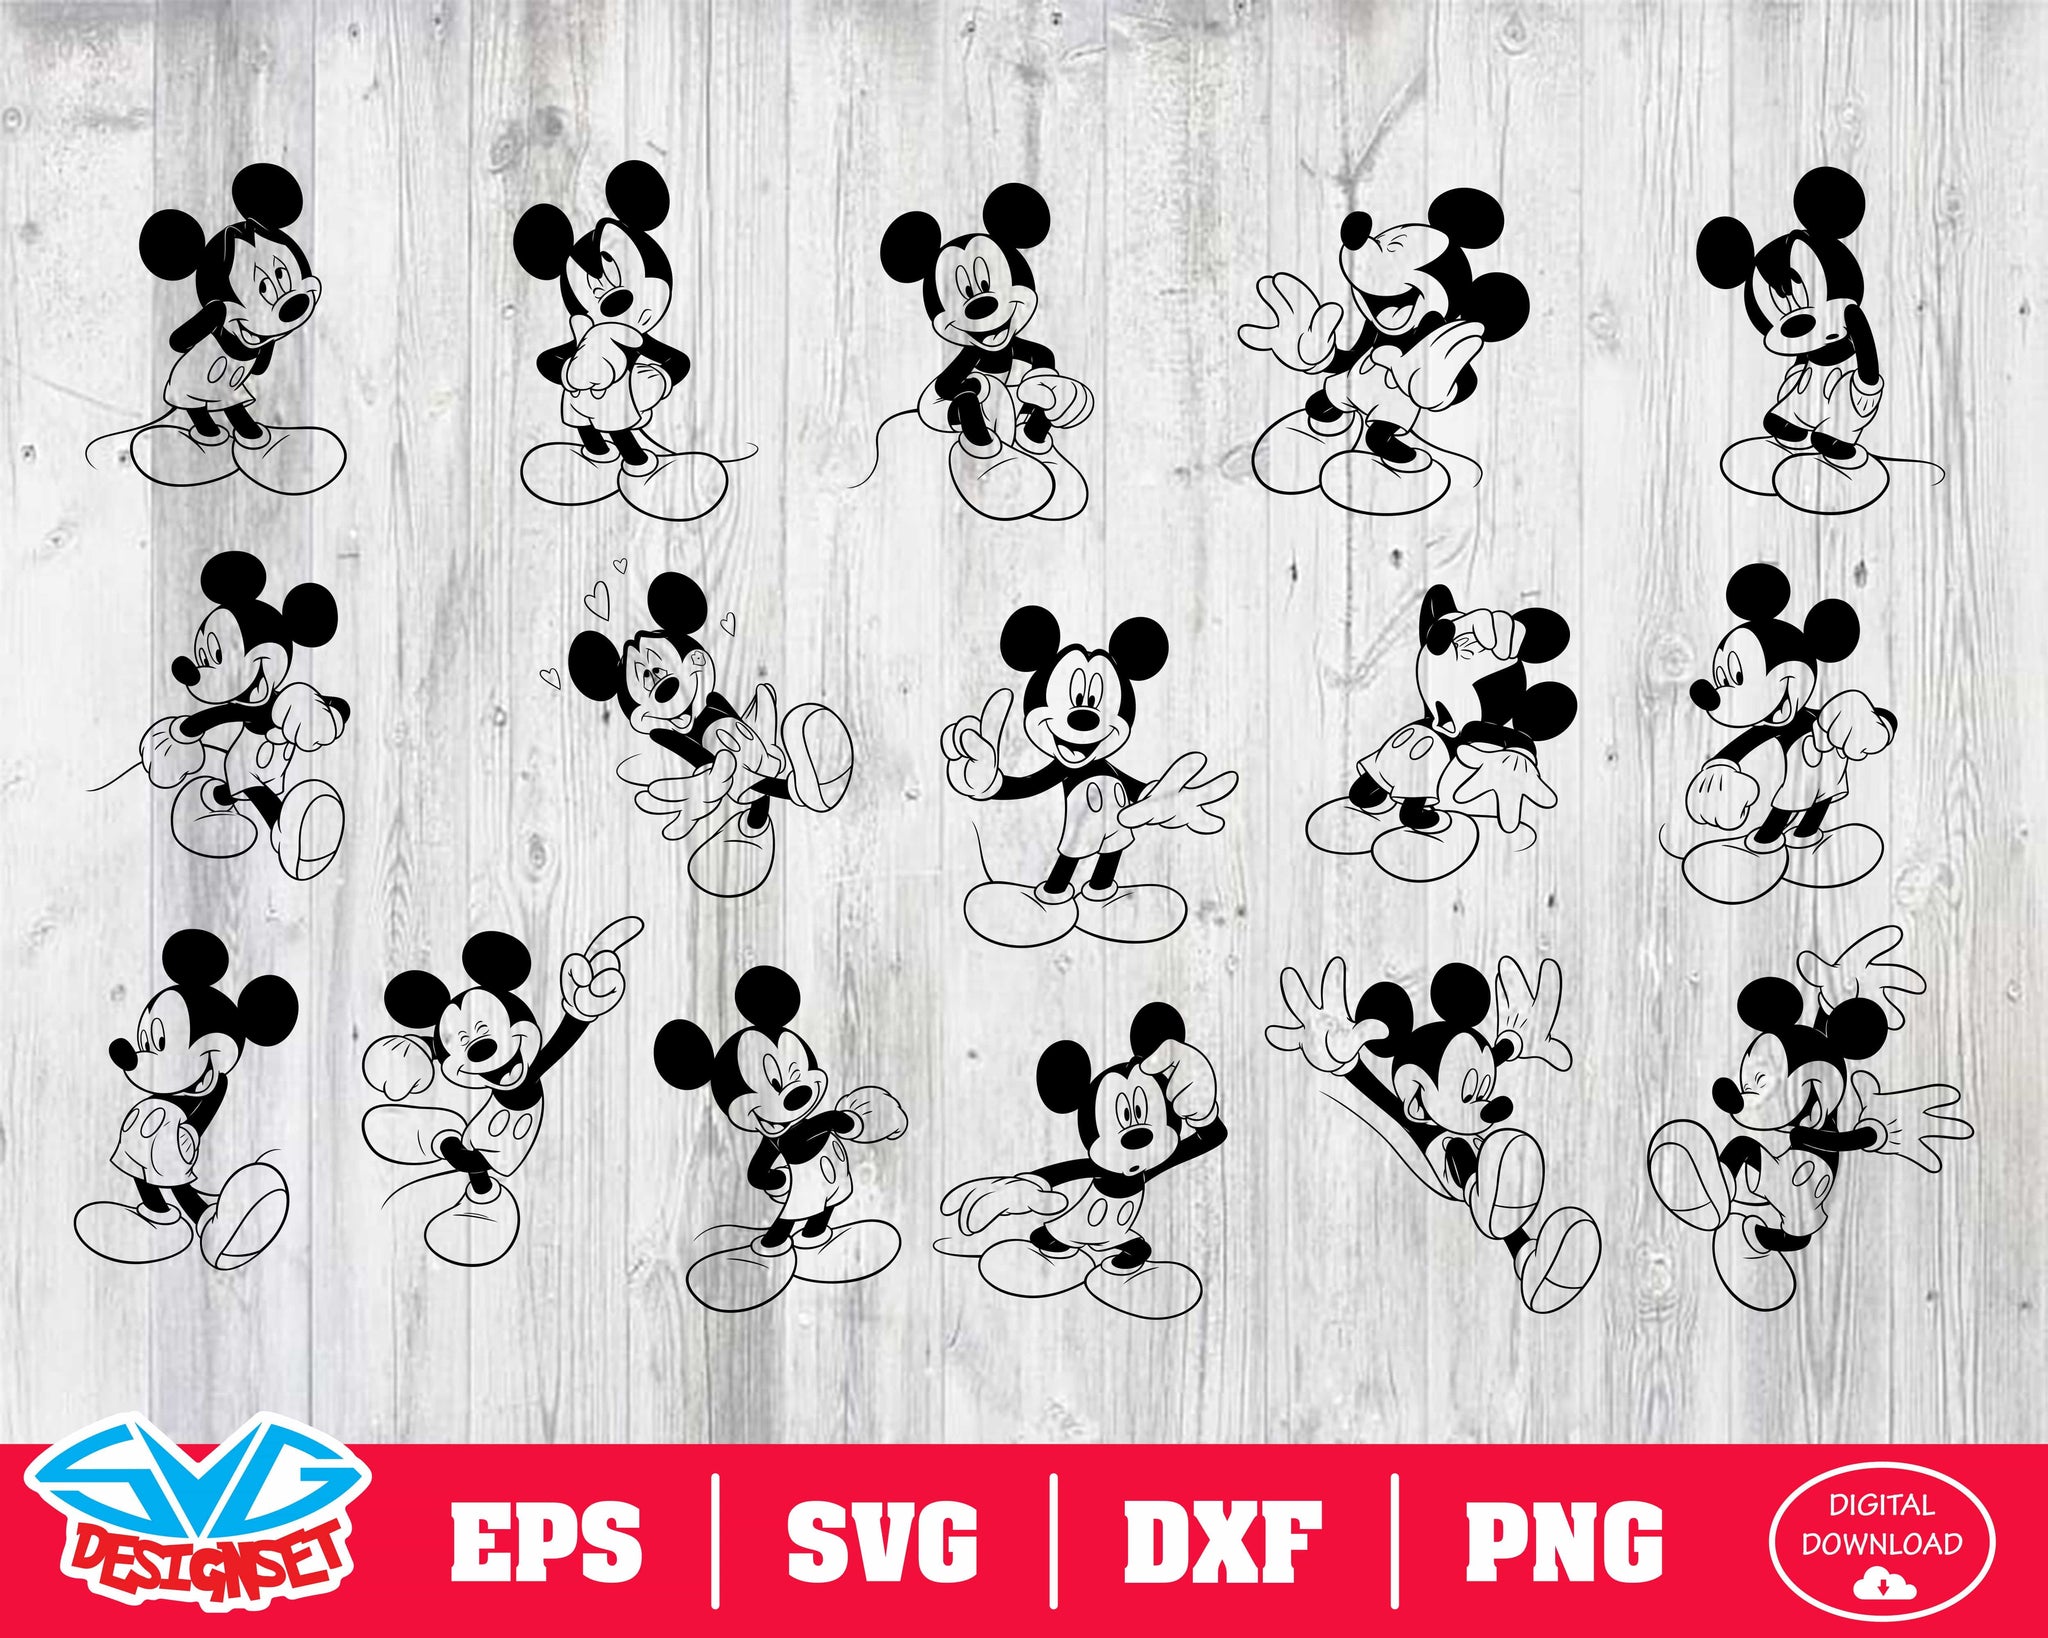 Mickey Mouse Svg, Dxf, Eps, Png, Clipart, Silhouette and Cutfiles #2 - SVGDesignSets